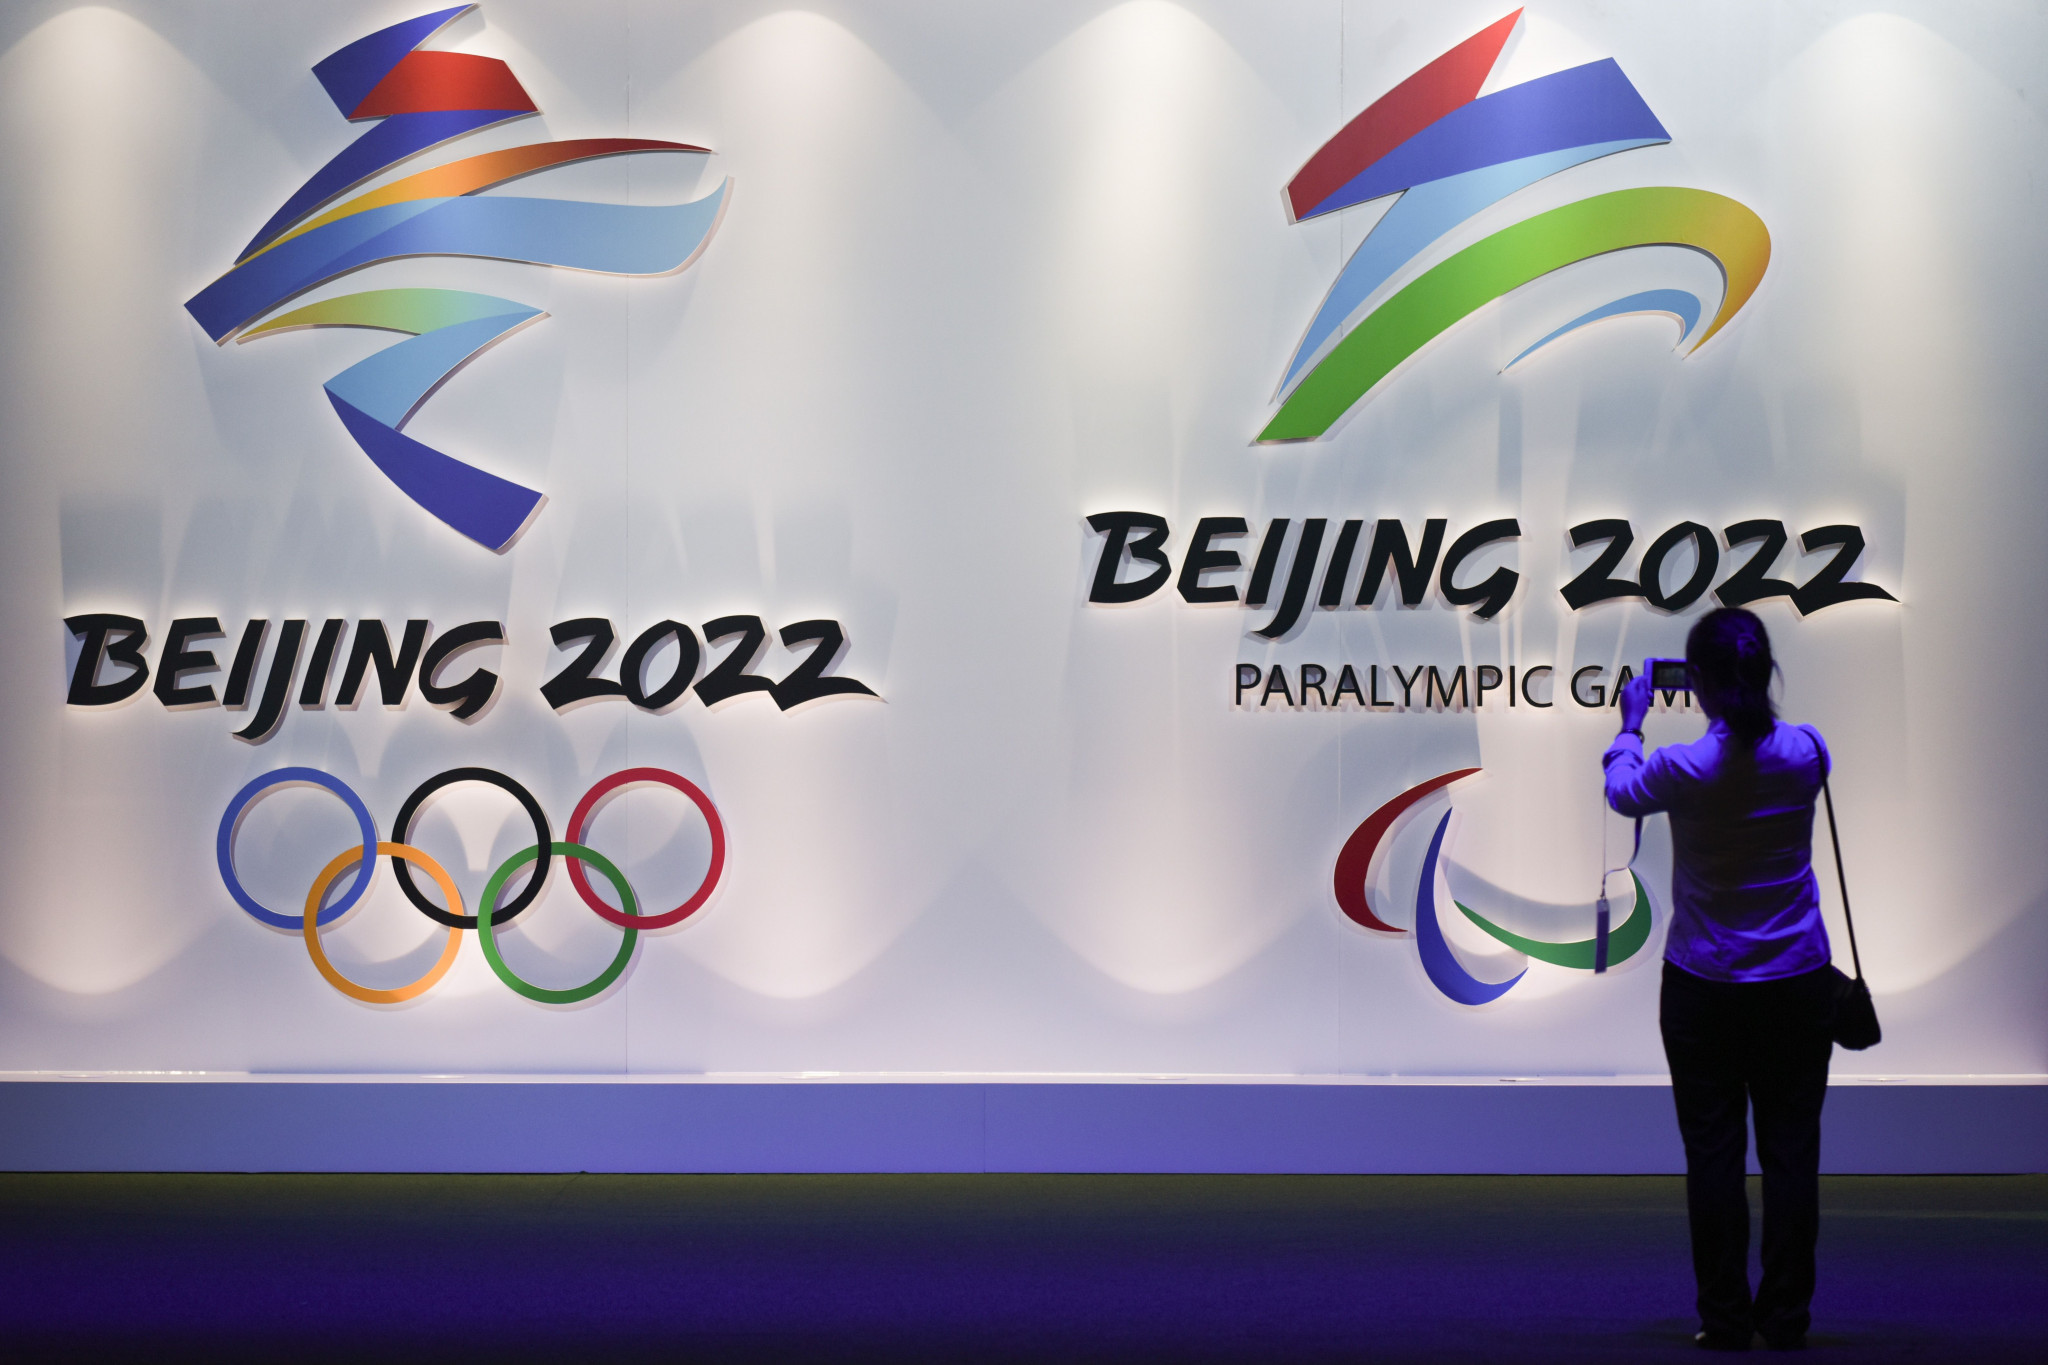 Beijing 2022's progress will be assessed during the IOC Coordination Commission's two-day visit ©Getty Images